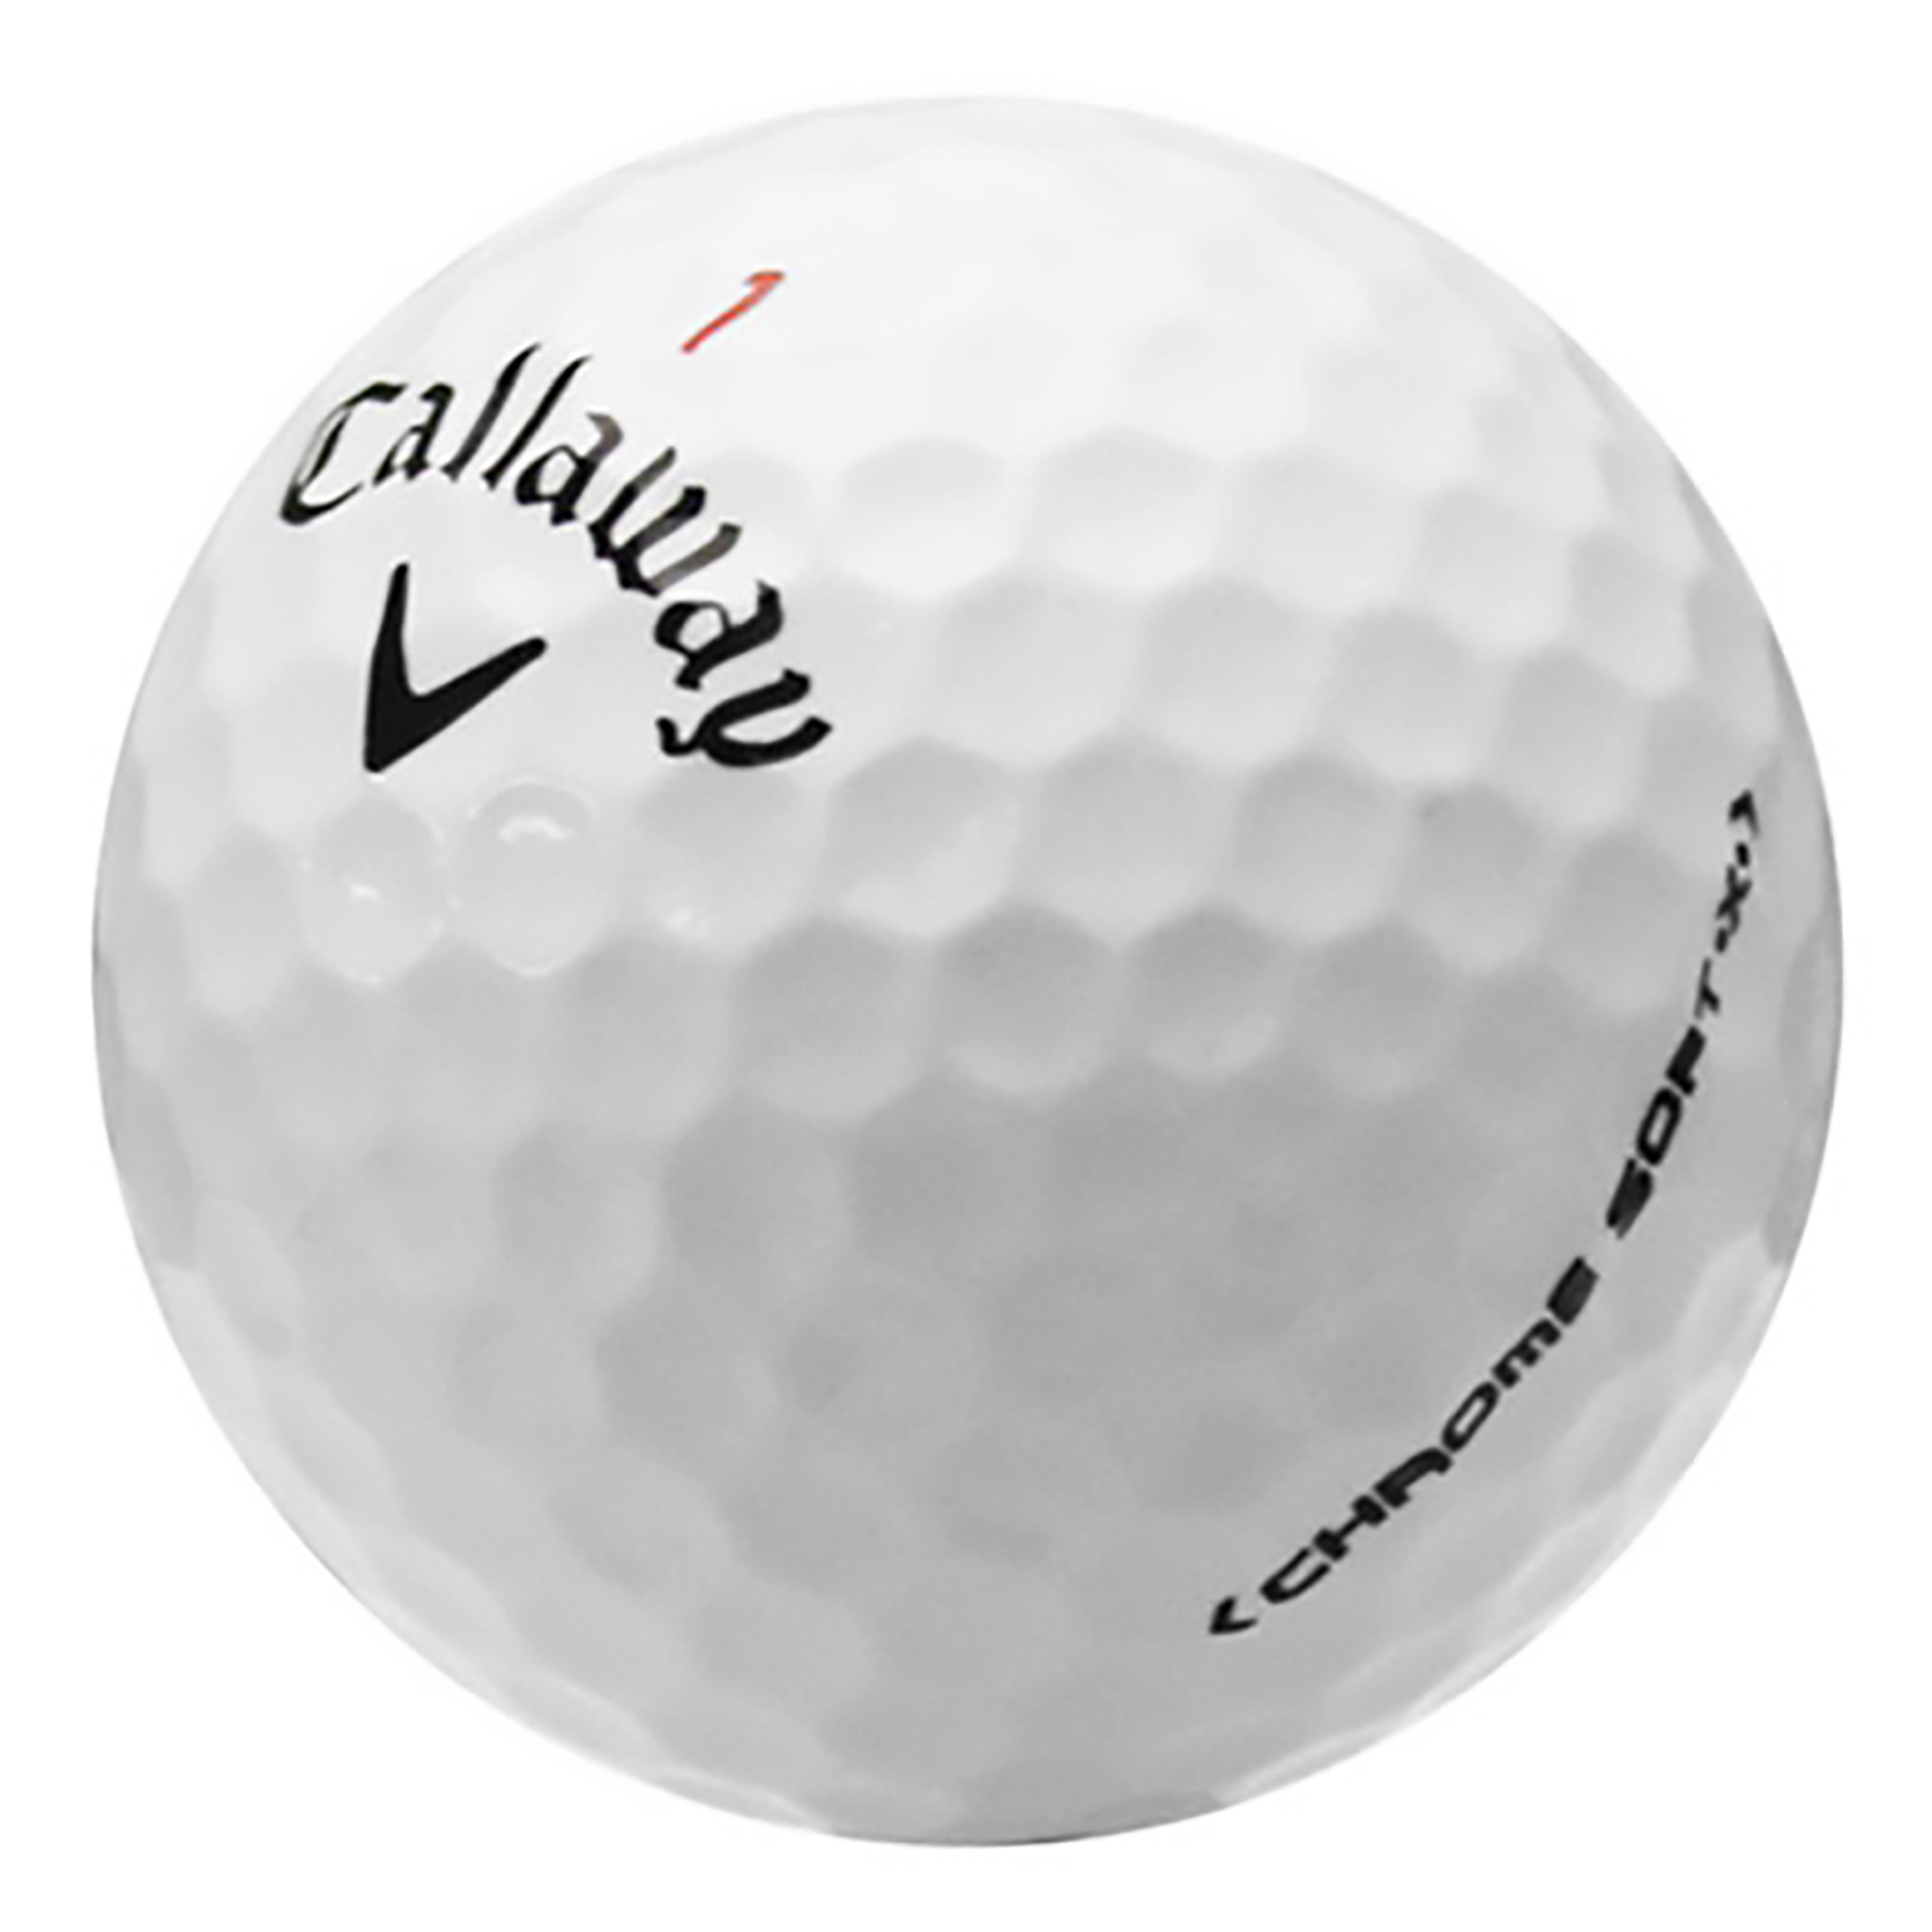 Callaway Chrome Soft X Golf Balls, Mint Refinished Quality, 12 Pack, White - image 1 of 9